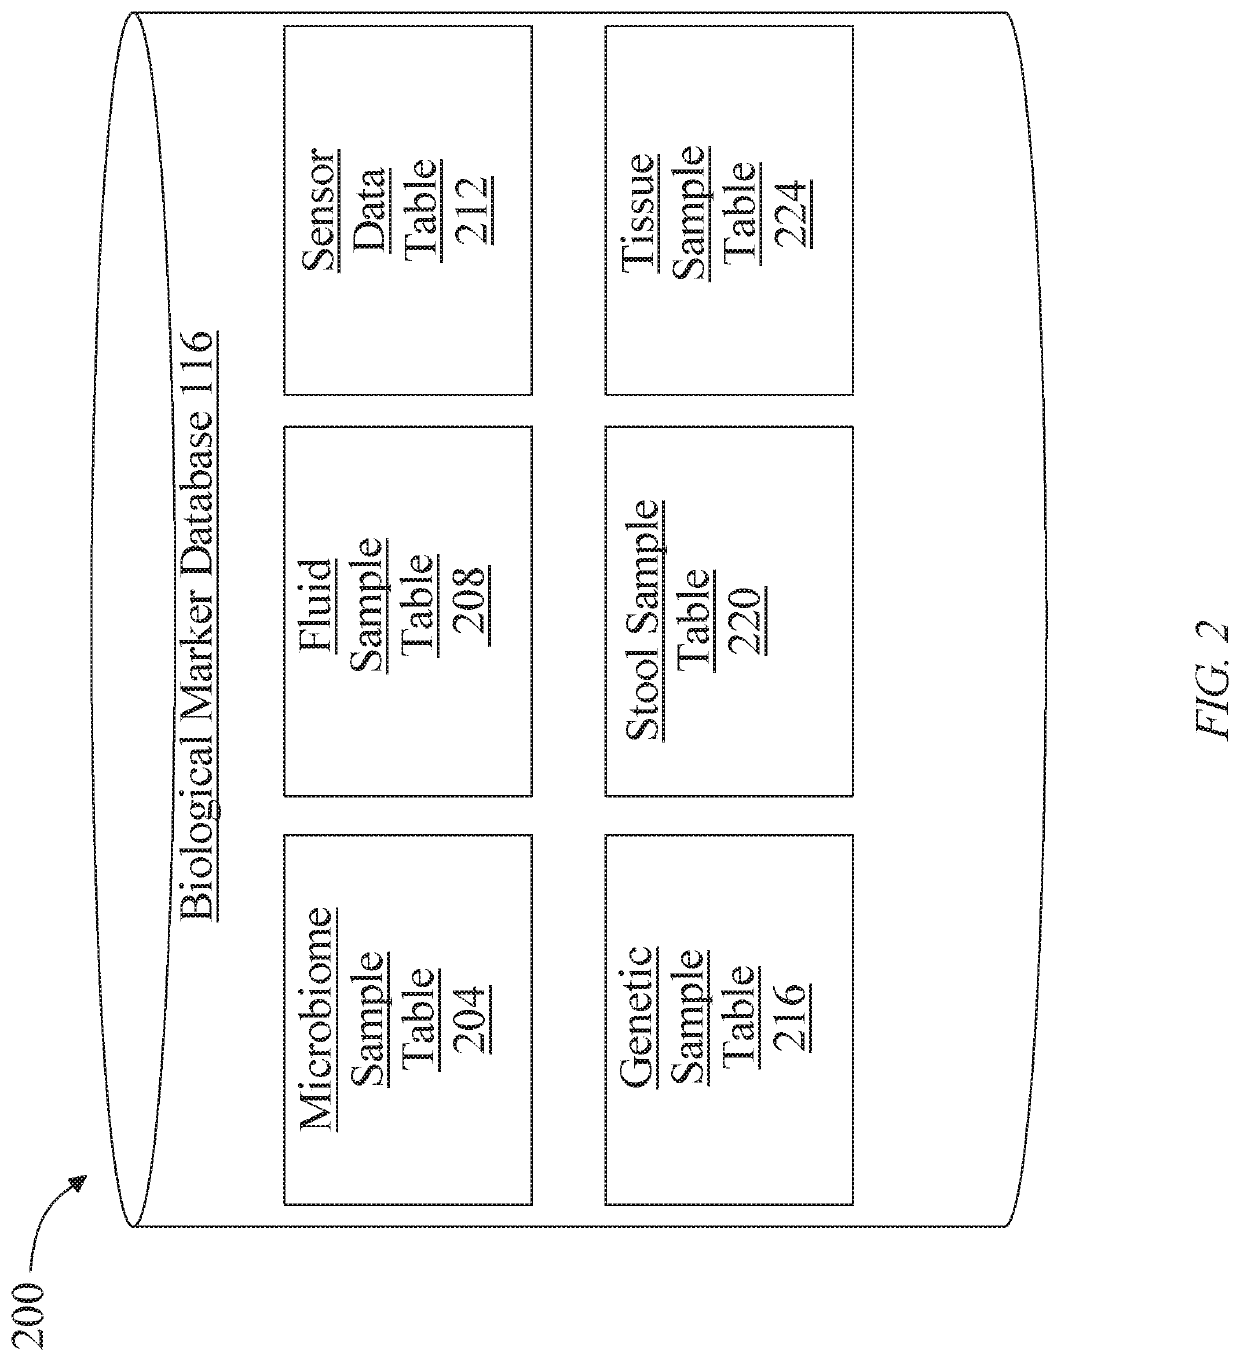 Methods and systems for identifying compatible meal options